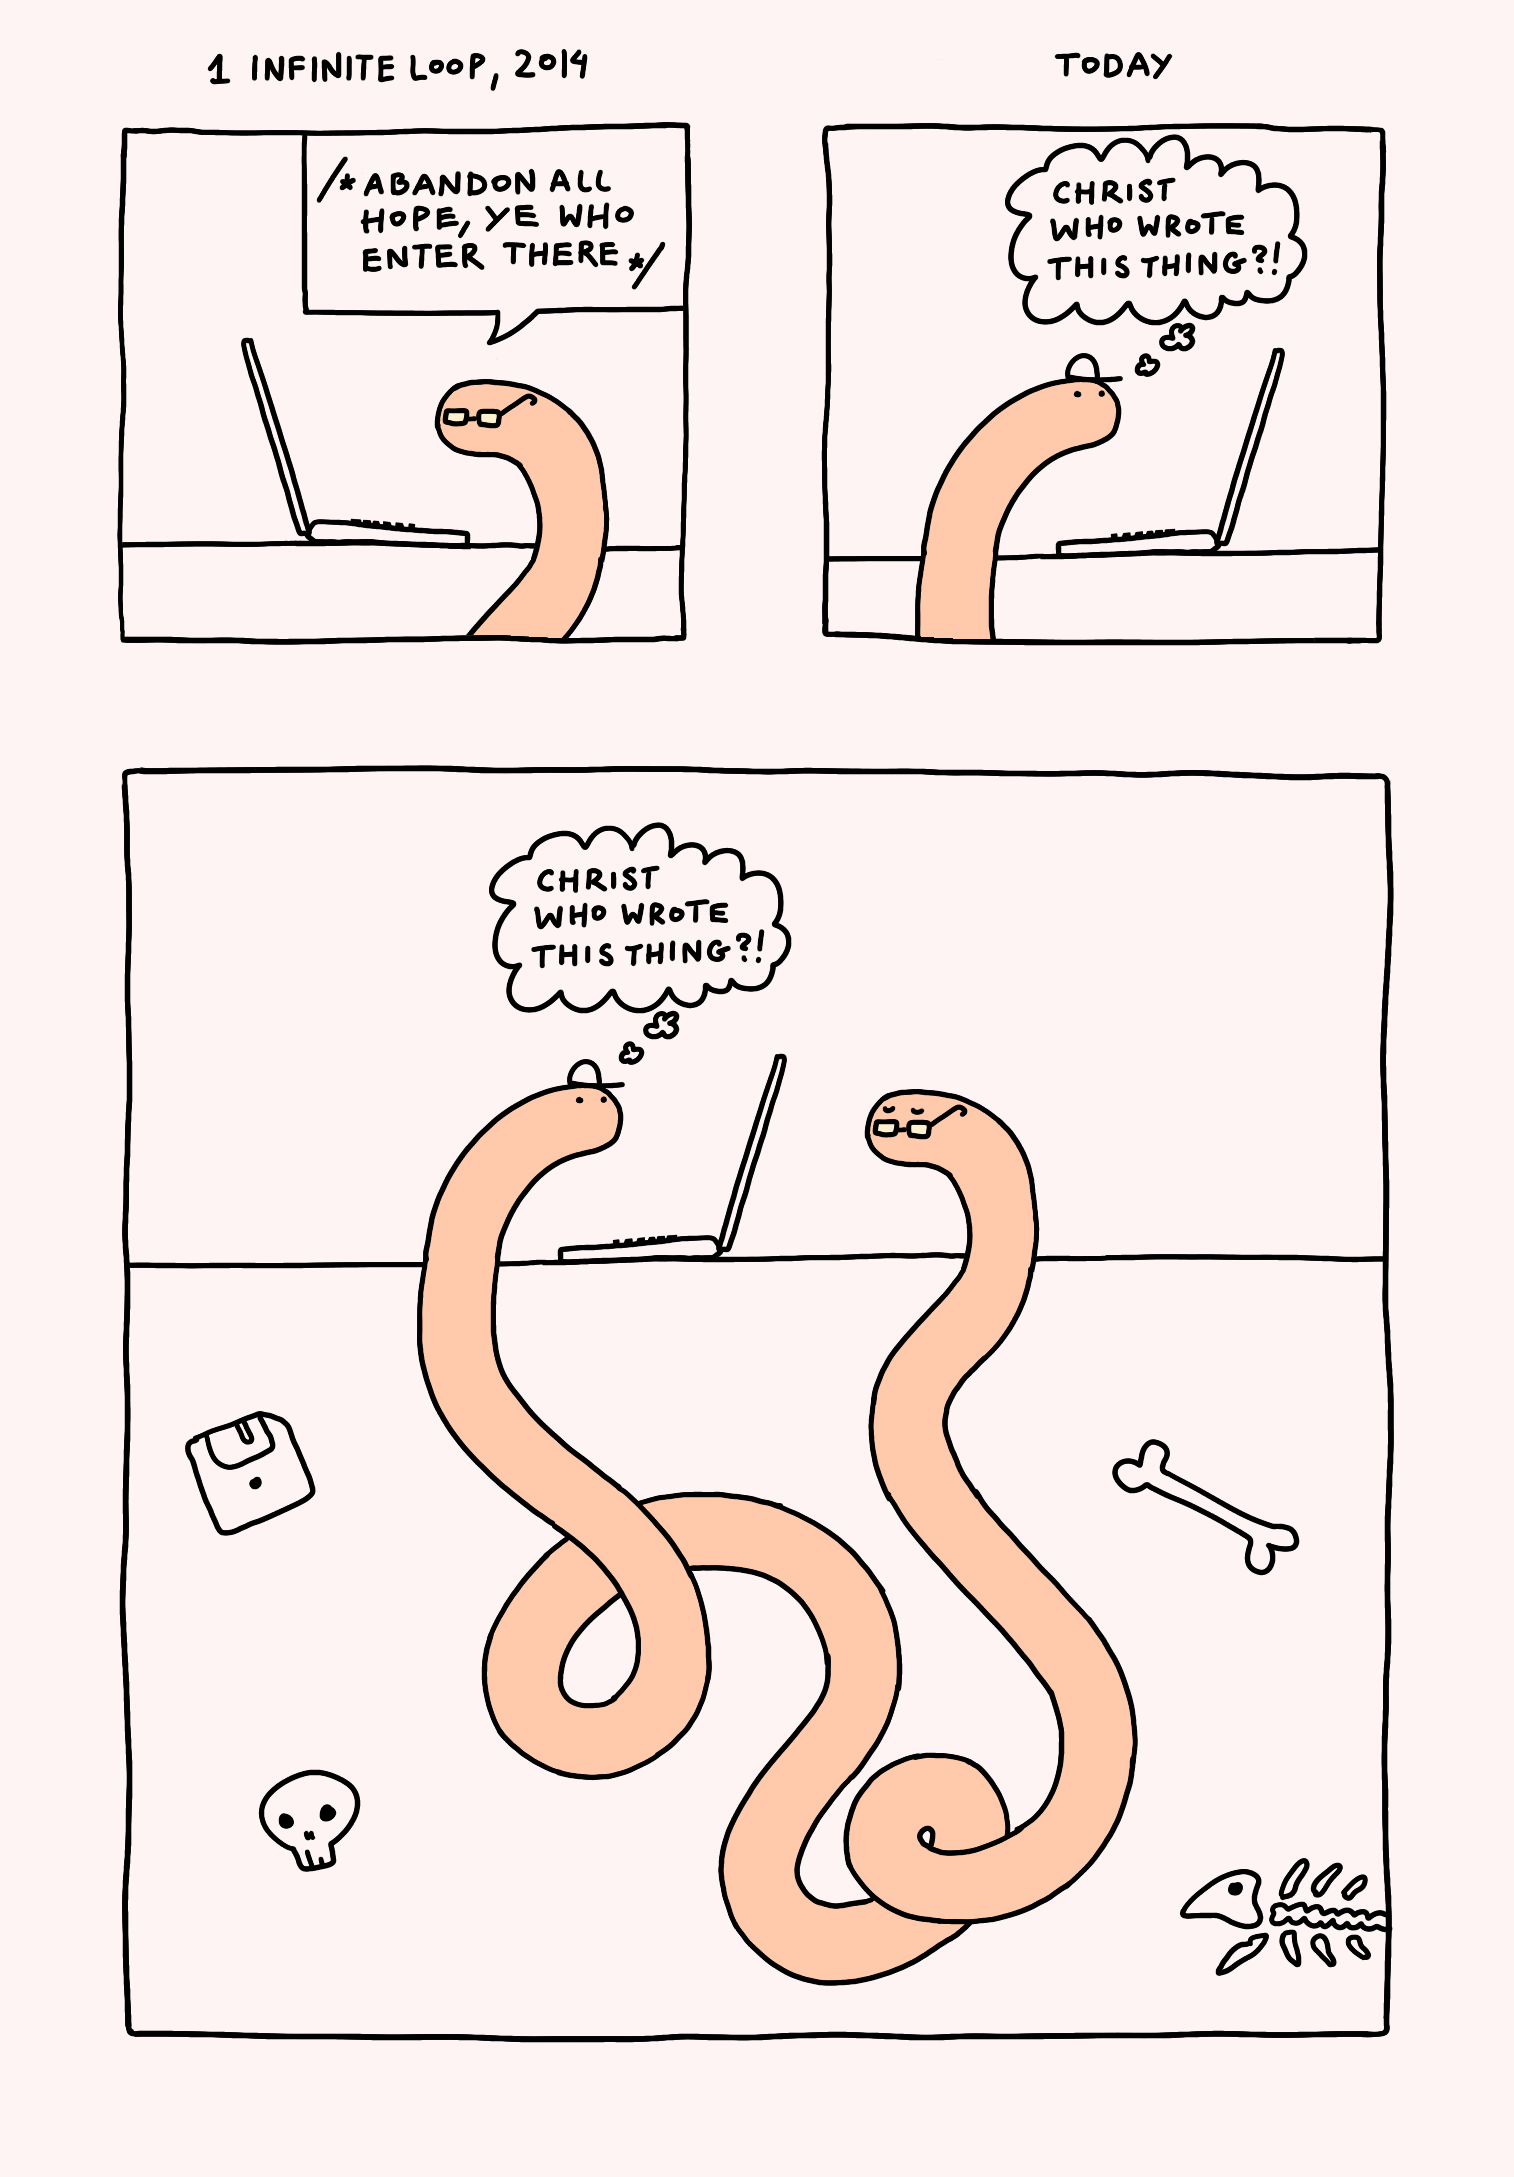 A comic strip describing two worms or snake complaining about each otherâ€™s work, while being in fact a single, two-headed snake